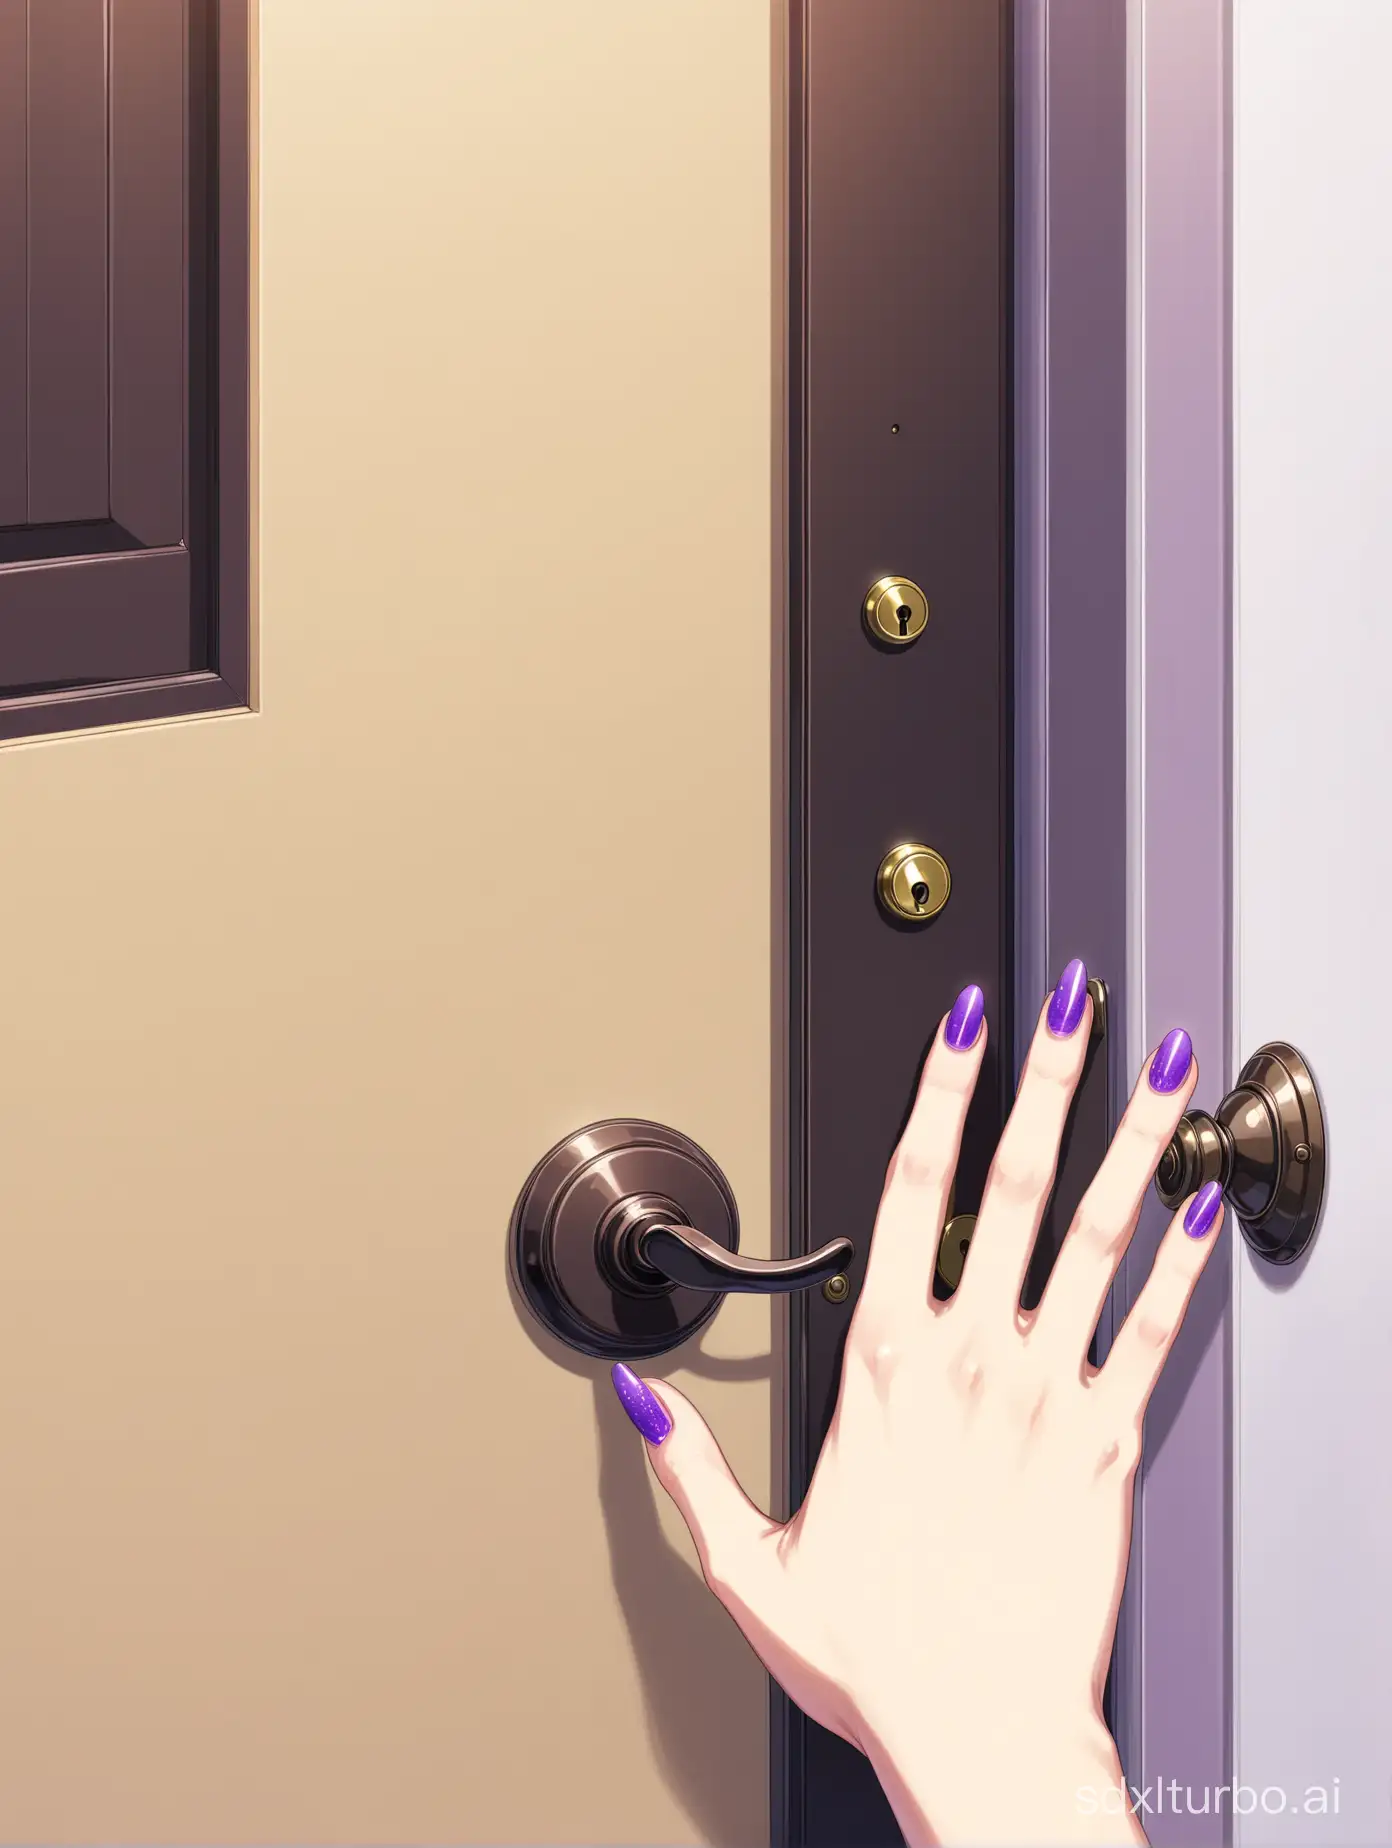 anime style, a woman's hand reaches out and rings the doorbell to a suburban house, purple fingernails, sleeveless